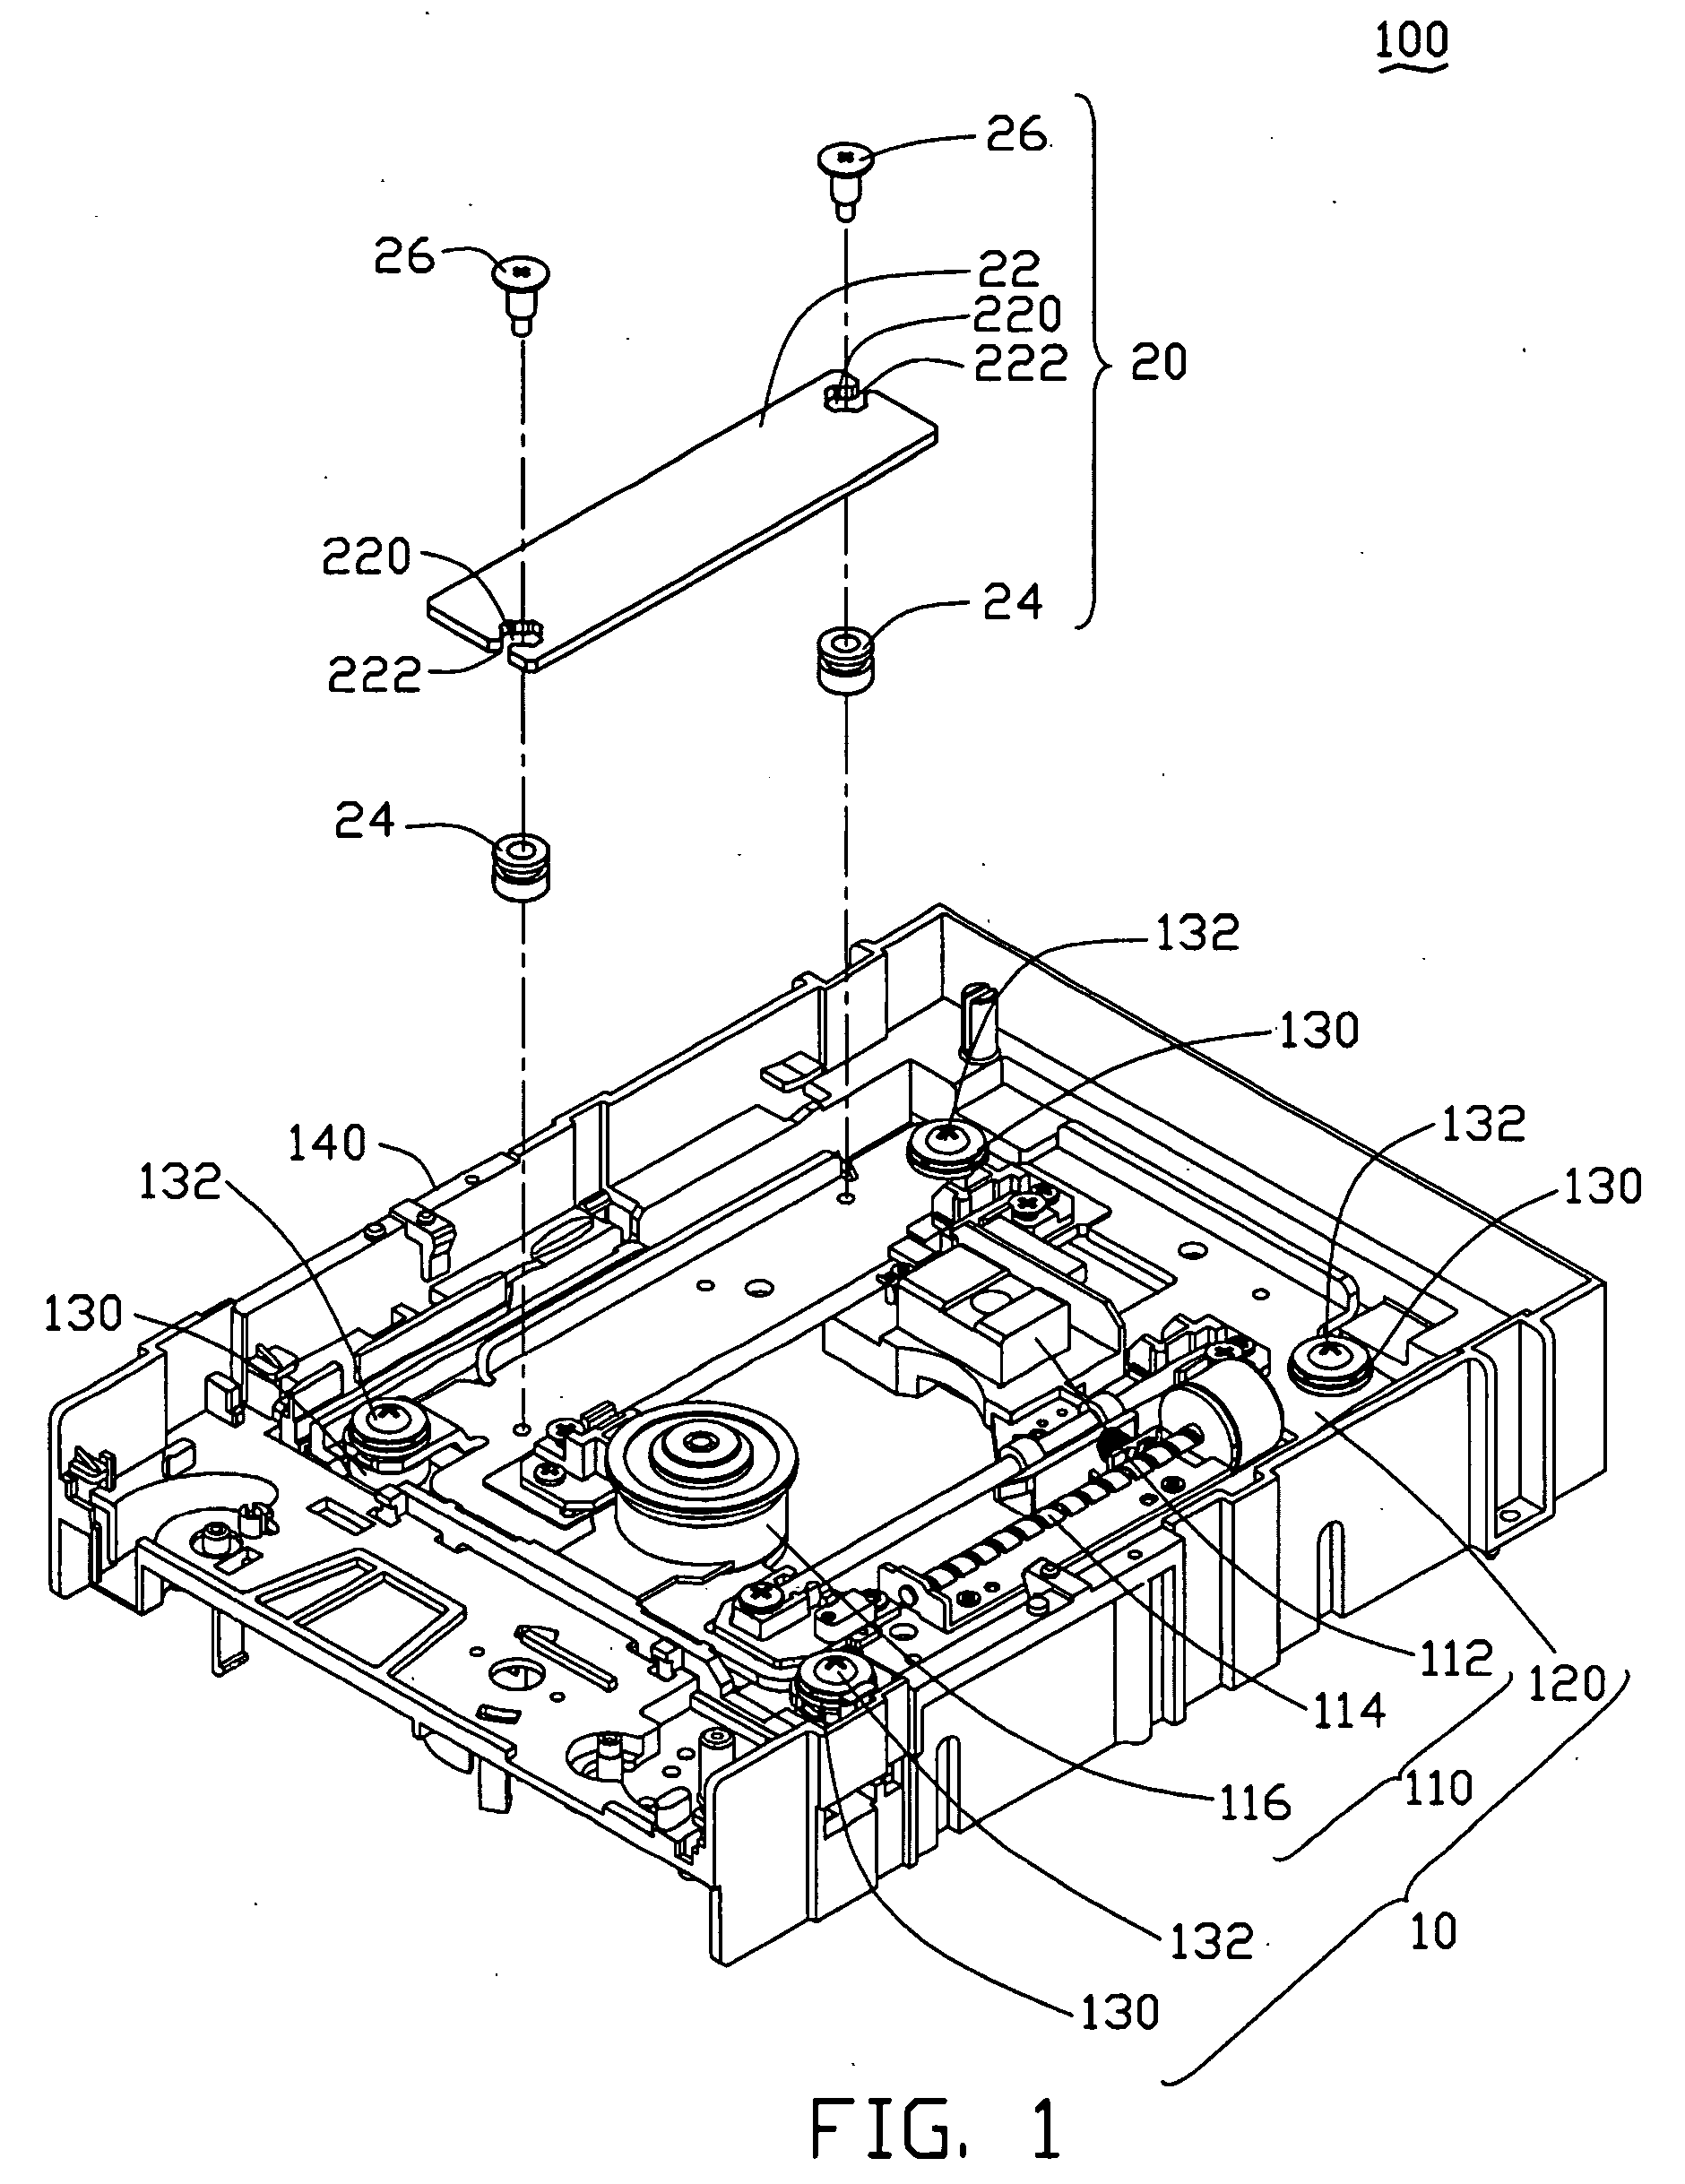 Vibration absorber system for an optical recording/reproducing apparatus